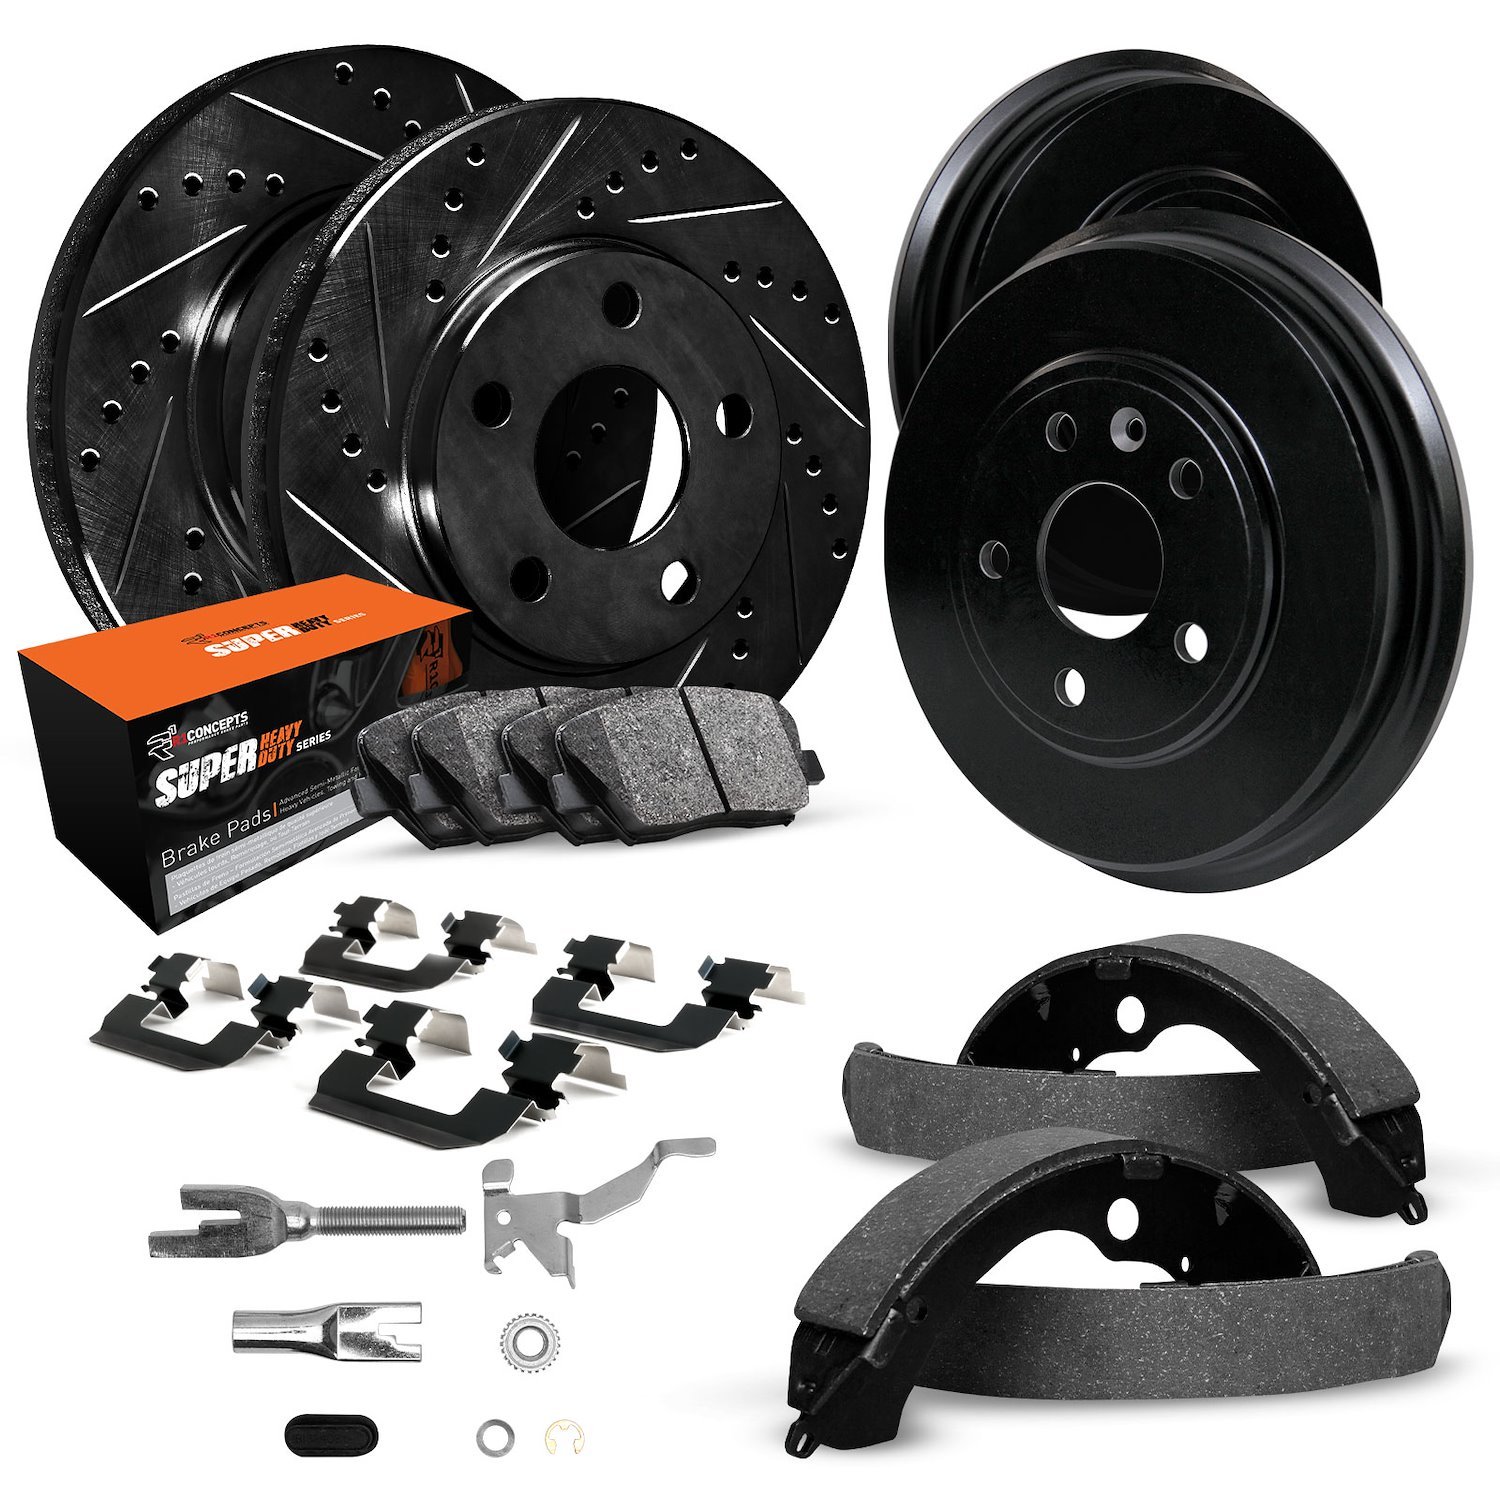 E-Line Drilled/Slotted Black Rotor & Drum Set w/Super-Duty Pads, Shoes, Hardware/Adjusters, 1976-1979 Ford/Lincoln/Mercury/Mazda